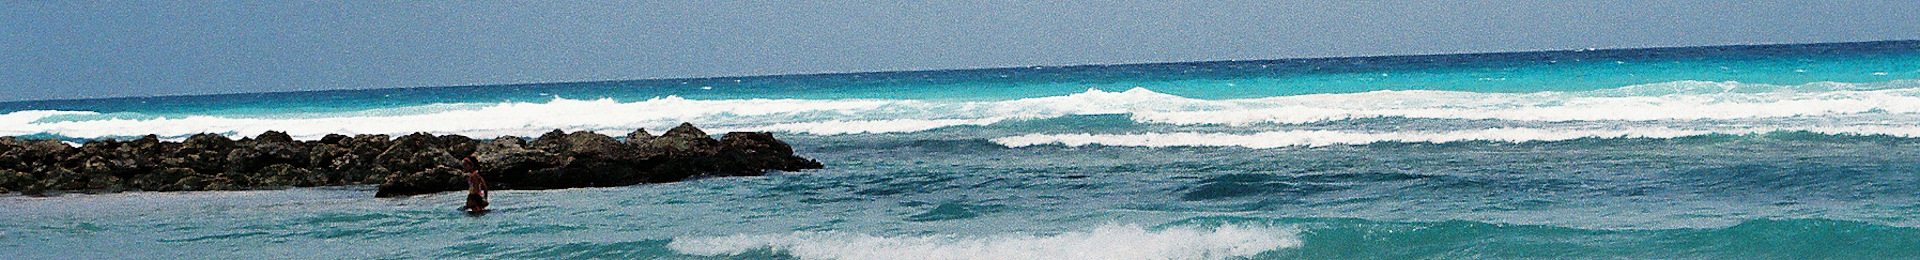 Photograph: View of ocean from Barbados.